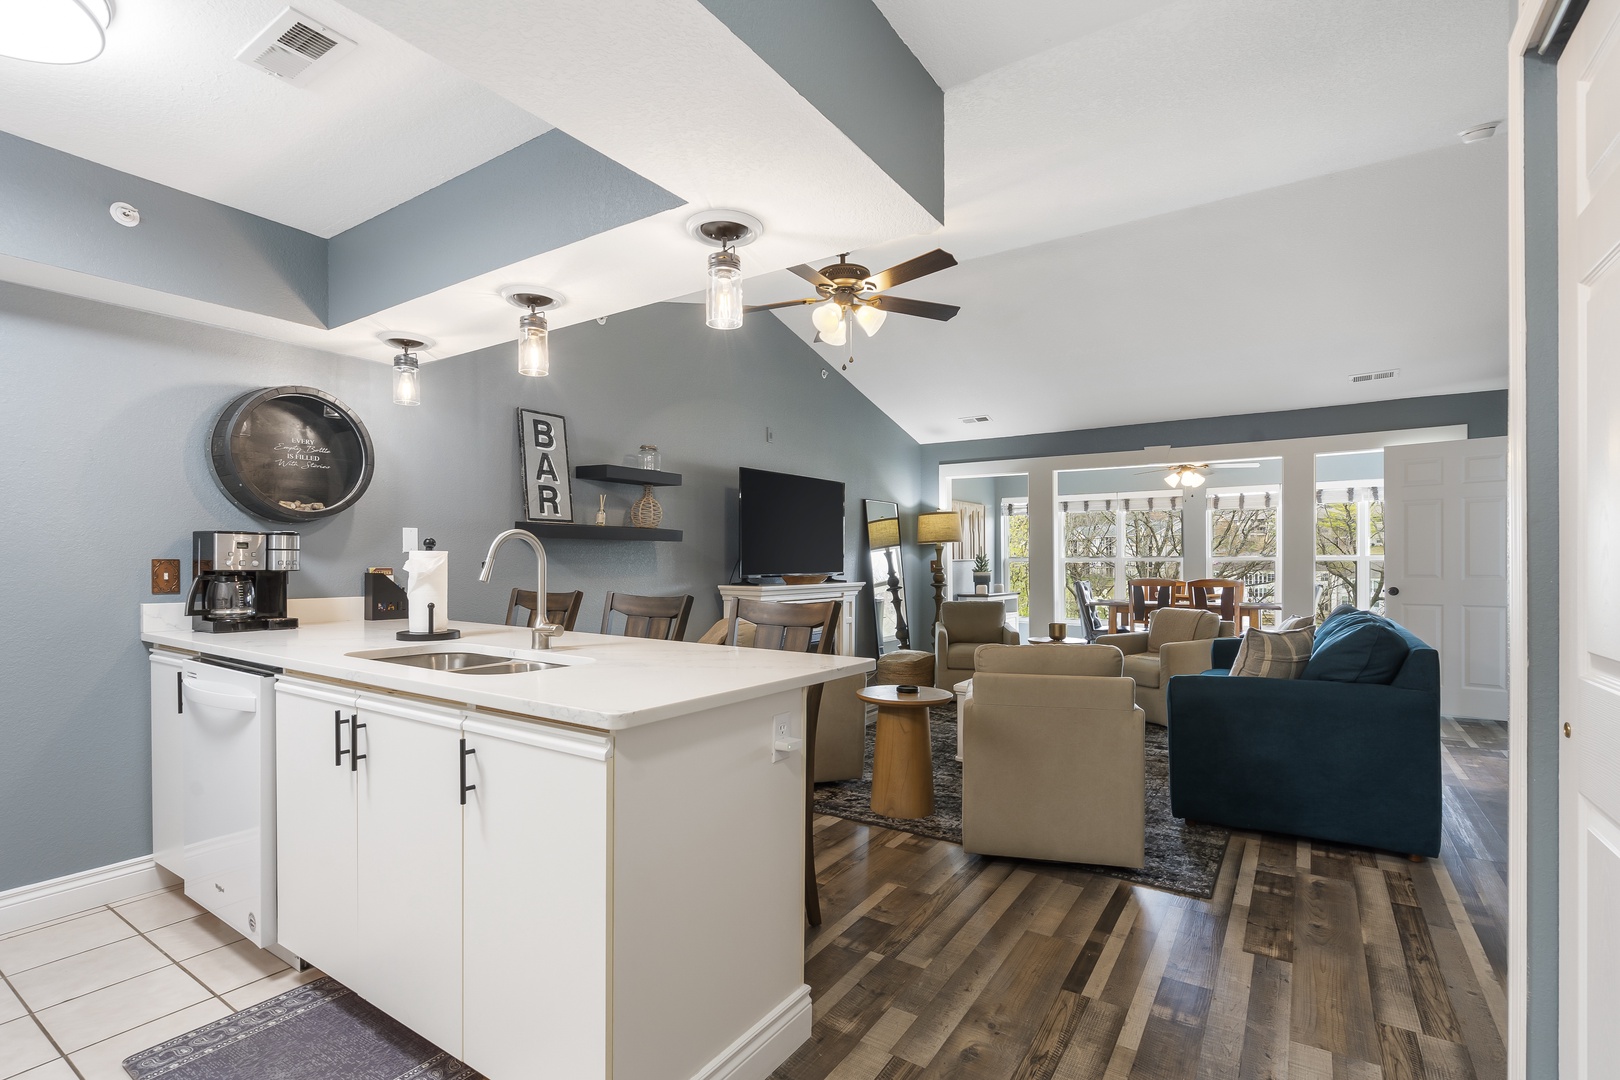 The open, breezy kitchen offers ample space & every home comfort